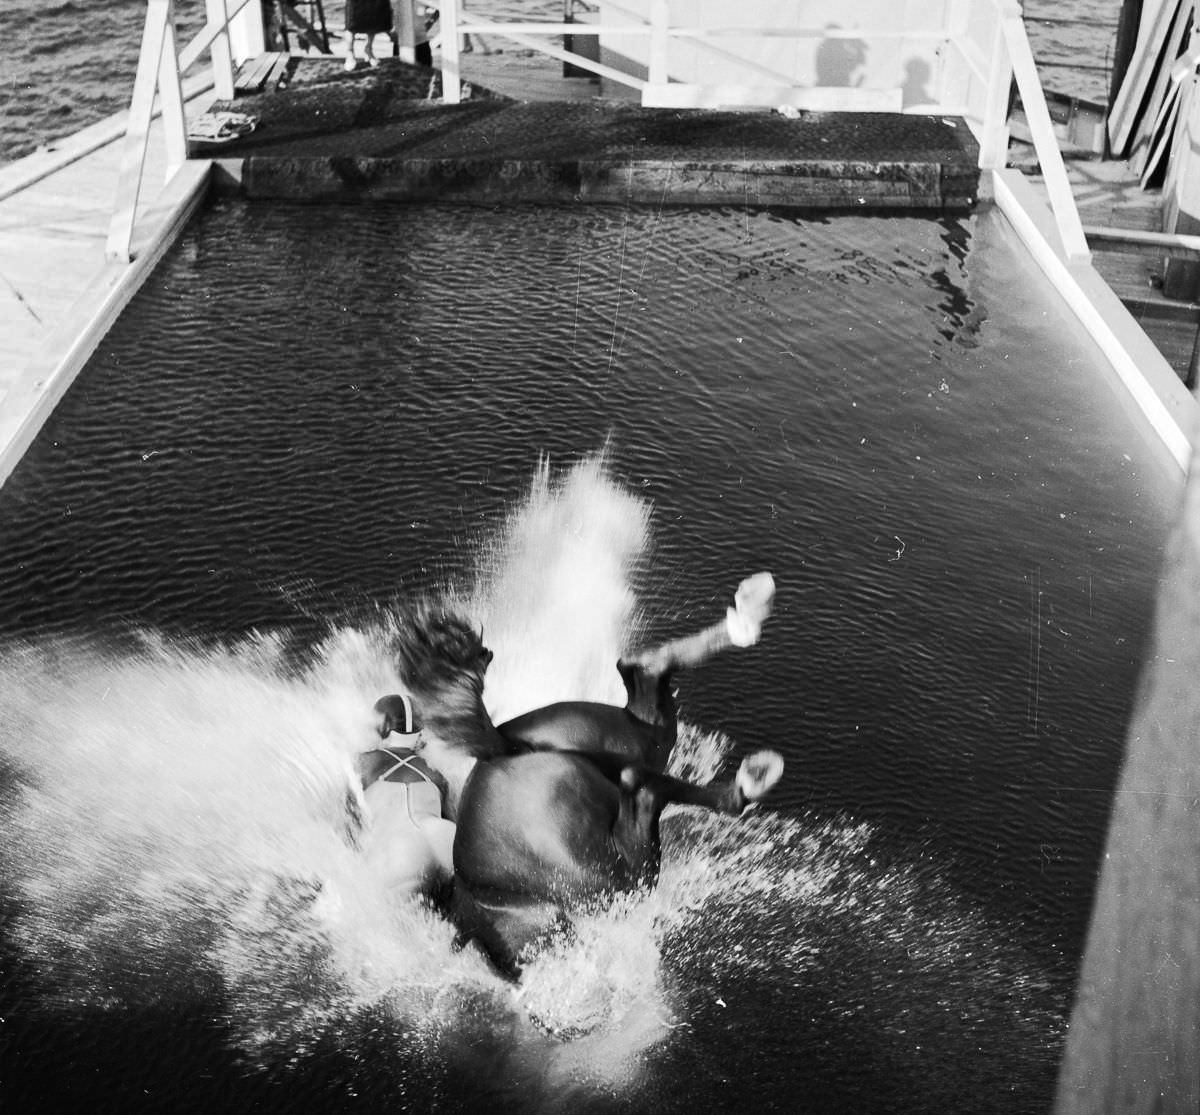 A horse with rider fallen into the water.